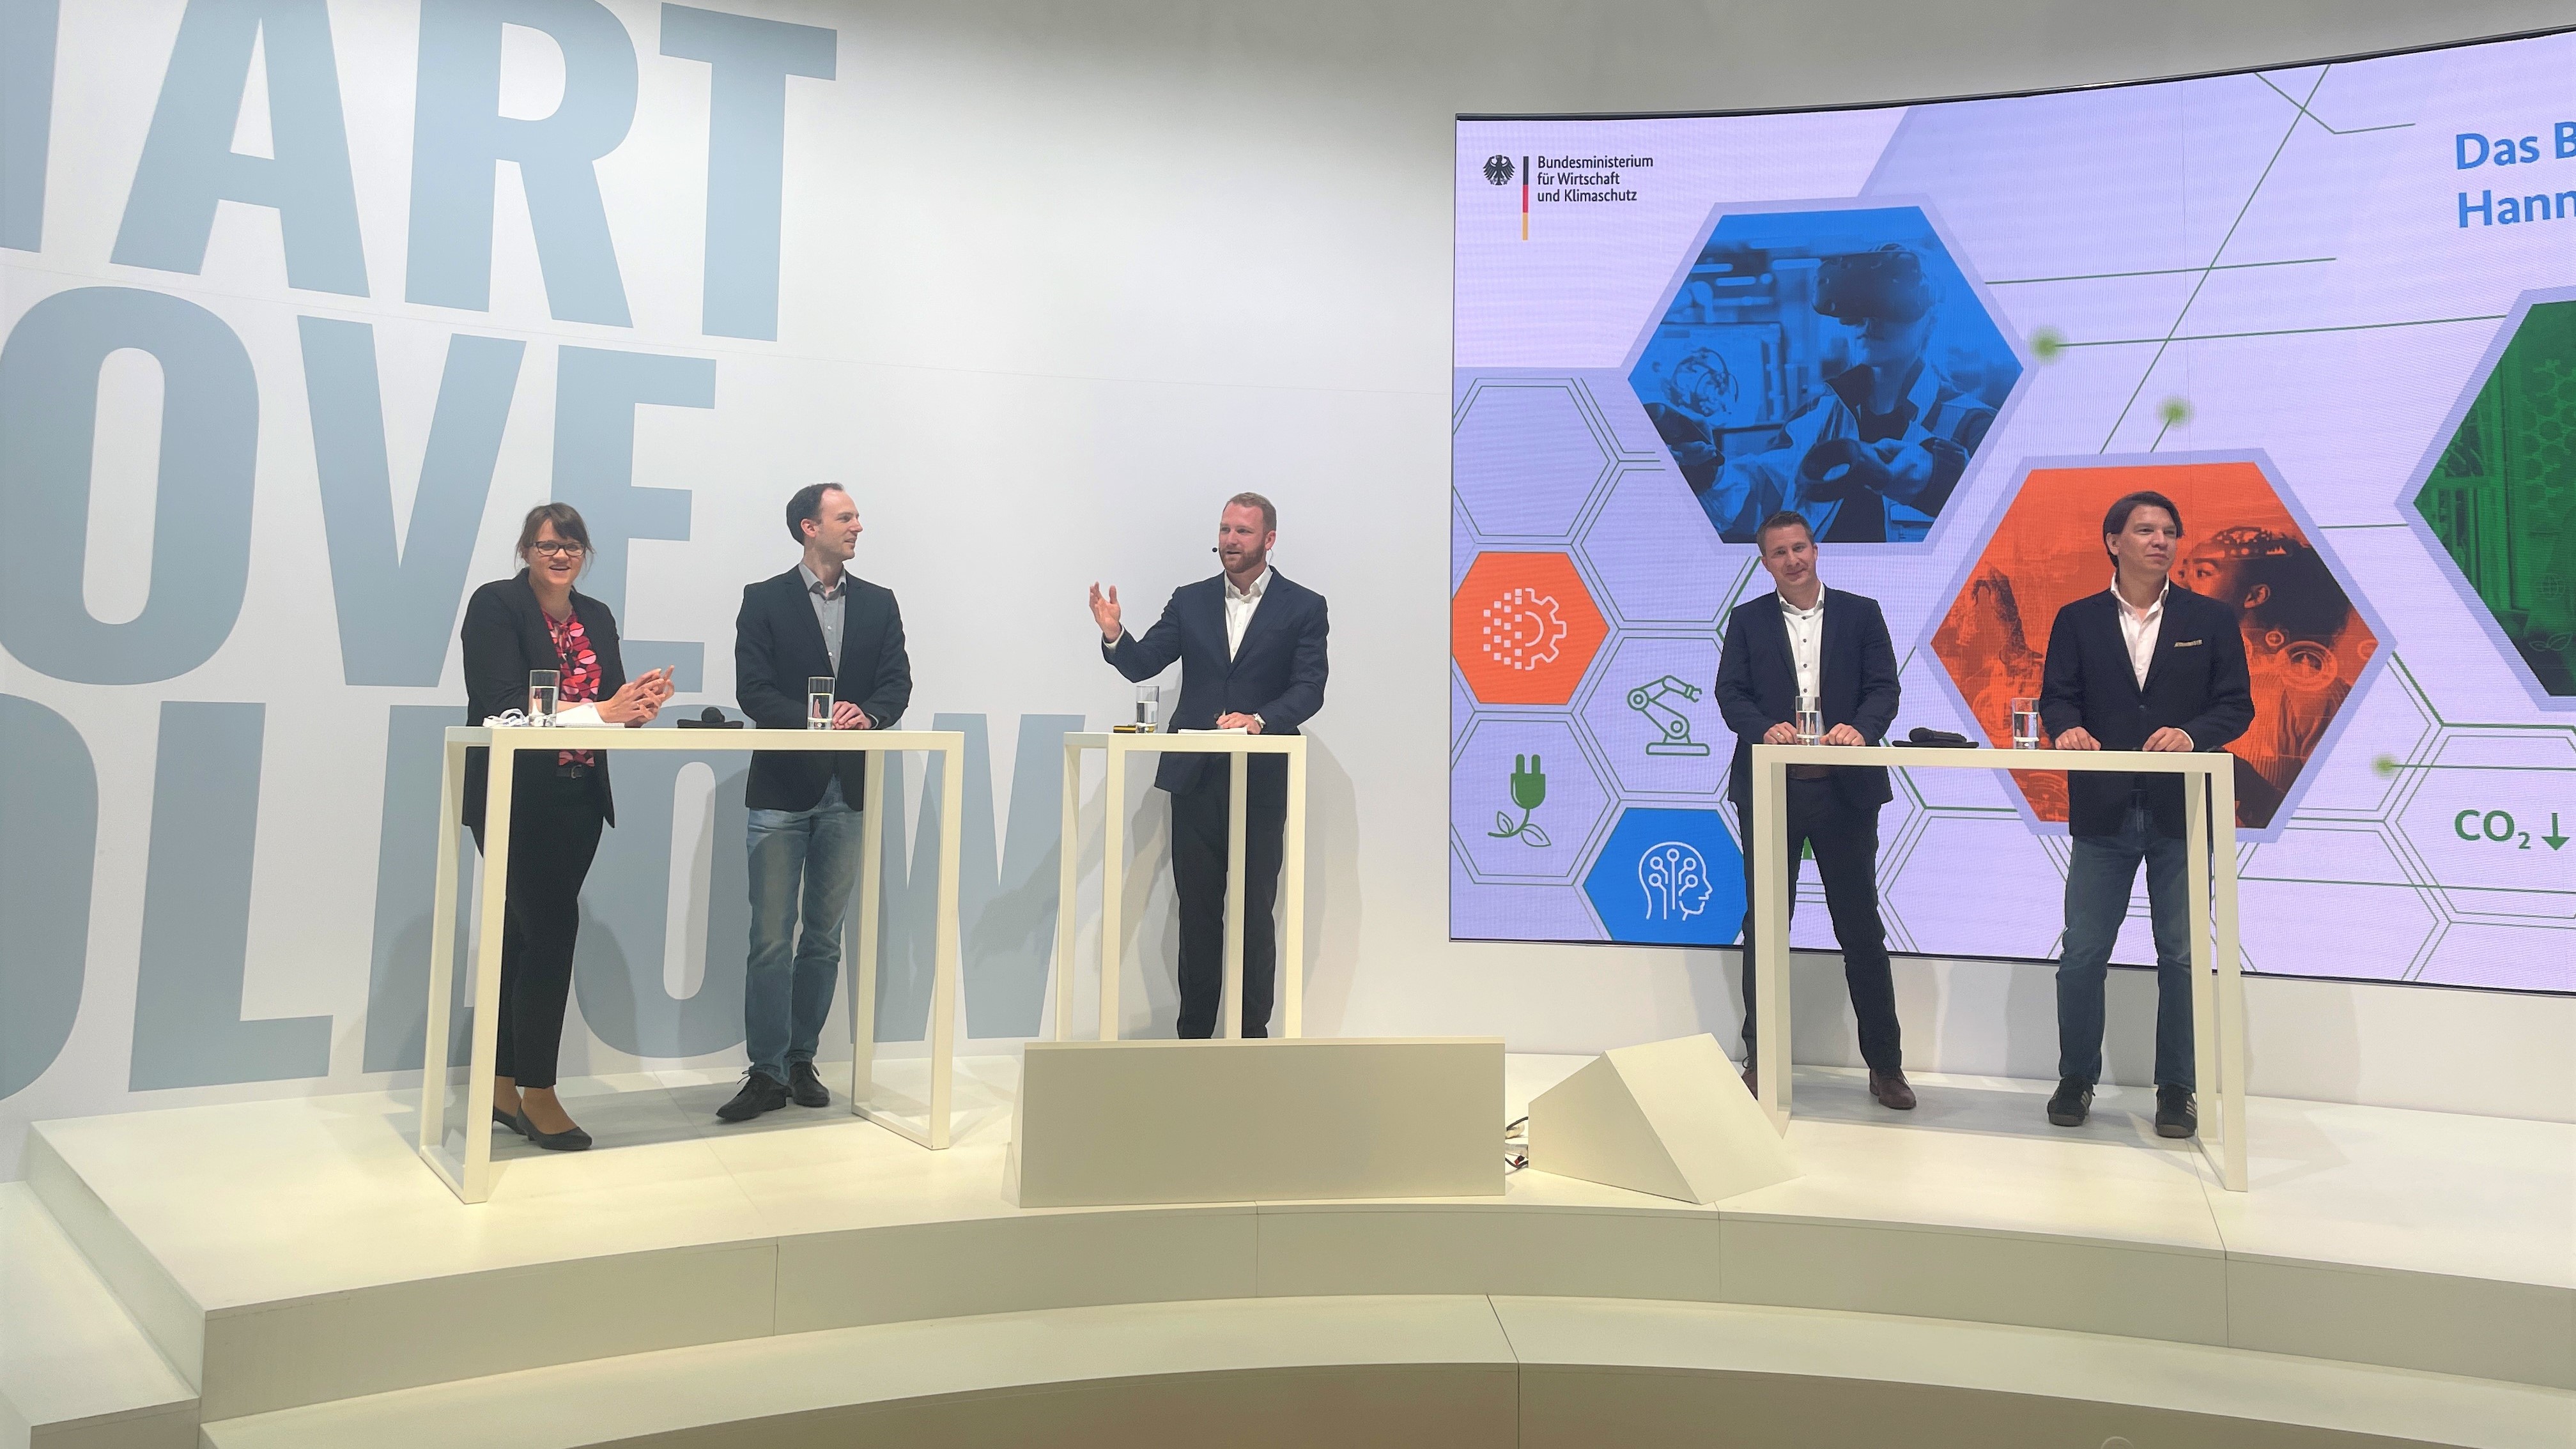 Marispace-X gets the Stage at the Hannover Messe 2022